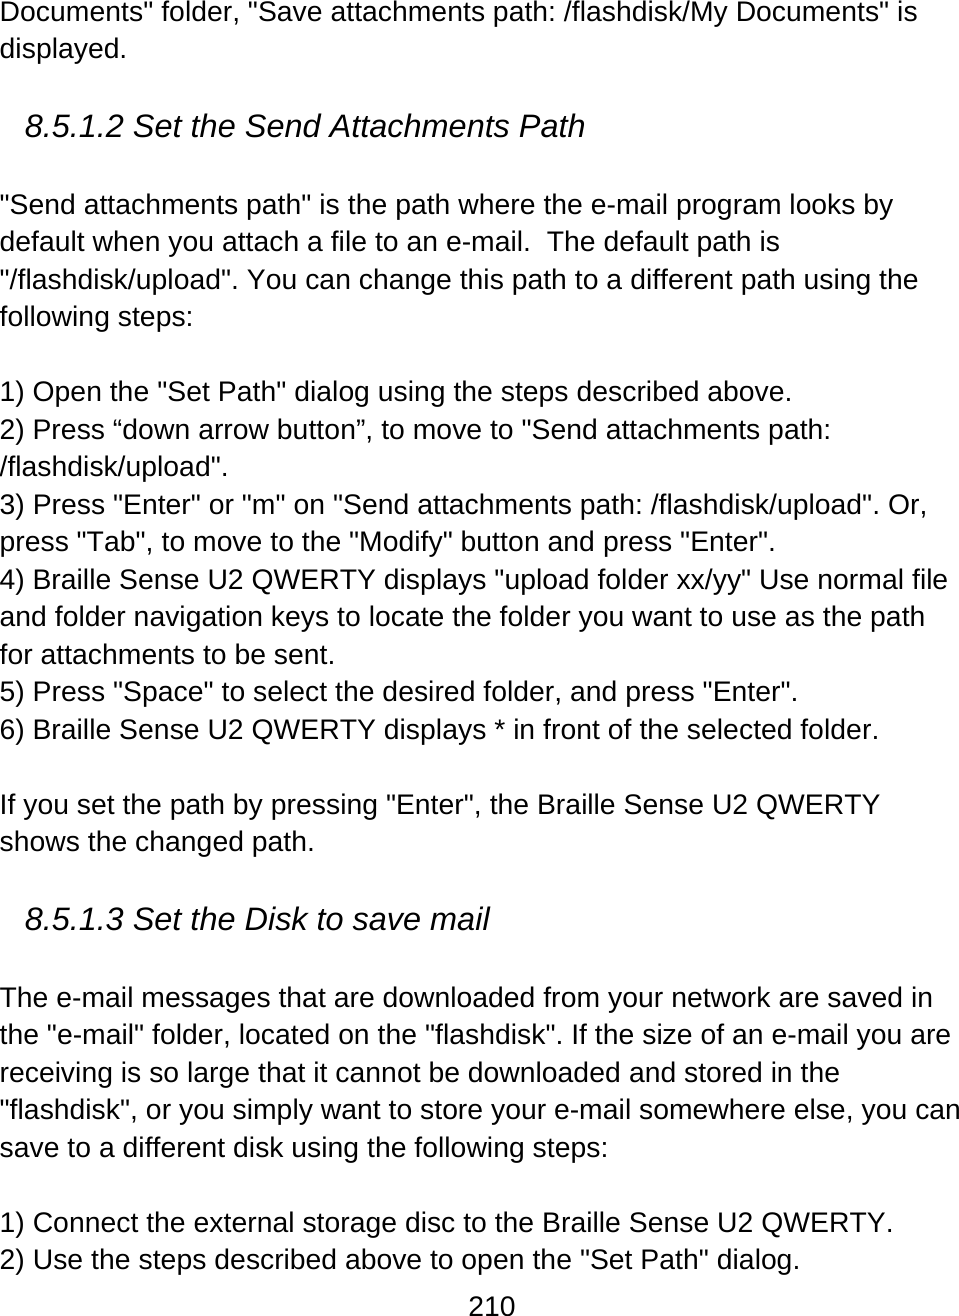 210  Documents&quot; folder, &quot;Save attachments path: /flashdisk/My Documents&quot; is displayed.  8.5.1.2 Set the Send Attachments Path  &quot;Send attachments path&quot; is the path where the e-mail program looks by default when you attach a file to an e-mail.  The default path is &quot;/flashdisk/upload&quot;. You can change this path to a different path using the following steps:  1) Open the &quot;Set Path&quot; dialog using the steps described above. 2) Press “down arrow button”, to move to &quot;Send attachments path: /flashdisk/upload&quot;. 3) Press &quot;Enter&quot; or &quot;m&quot; on &quot;Send attachments path: /flashdisk/upload&quot;. Or, press &quot;Tab&quot;, to move to the &quot;Modify&quot; button and press &quot;Enter&quot;. 4) Braille Sense U2 QWERTY displays &quot;upload folder xx/yy&quot; Use normal file and folder navigation keys to locate the folder you want to use as the path for attachments to be sent.  5) Press &quot;Space&quot; to select the desired folder, and press &quot;Enter&quot;.  6) Braille Sense U2 QWERTY displays * in front of the selected folder.  If you set the path by pressing &quot;Enter&quot;, the Braille Sense U2 QWERTY shows the changed path.   8.5.1.3 Set the Disk to save mail  The e-mail messages that are downloaded from your network are saved in the &quot;e-mail&quot; folder, located on the &quot;flashdisk&quot;. If the size of an e-mail you are receiving is so large that it cannot be downloaded and stored in the &quot;flashdisk&quot;, or you simply want to store your e-mail somewhere else, you can save to a different disk using the following steps:  1) Connect the external storage disc to the Braille Sense U2 QWERTY. 2) Use the steps described above to open the &quot;Set Path&quot; dialog. 